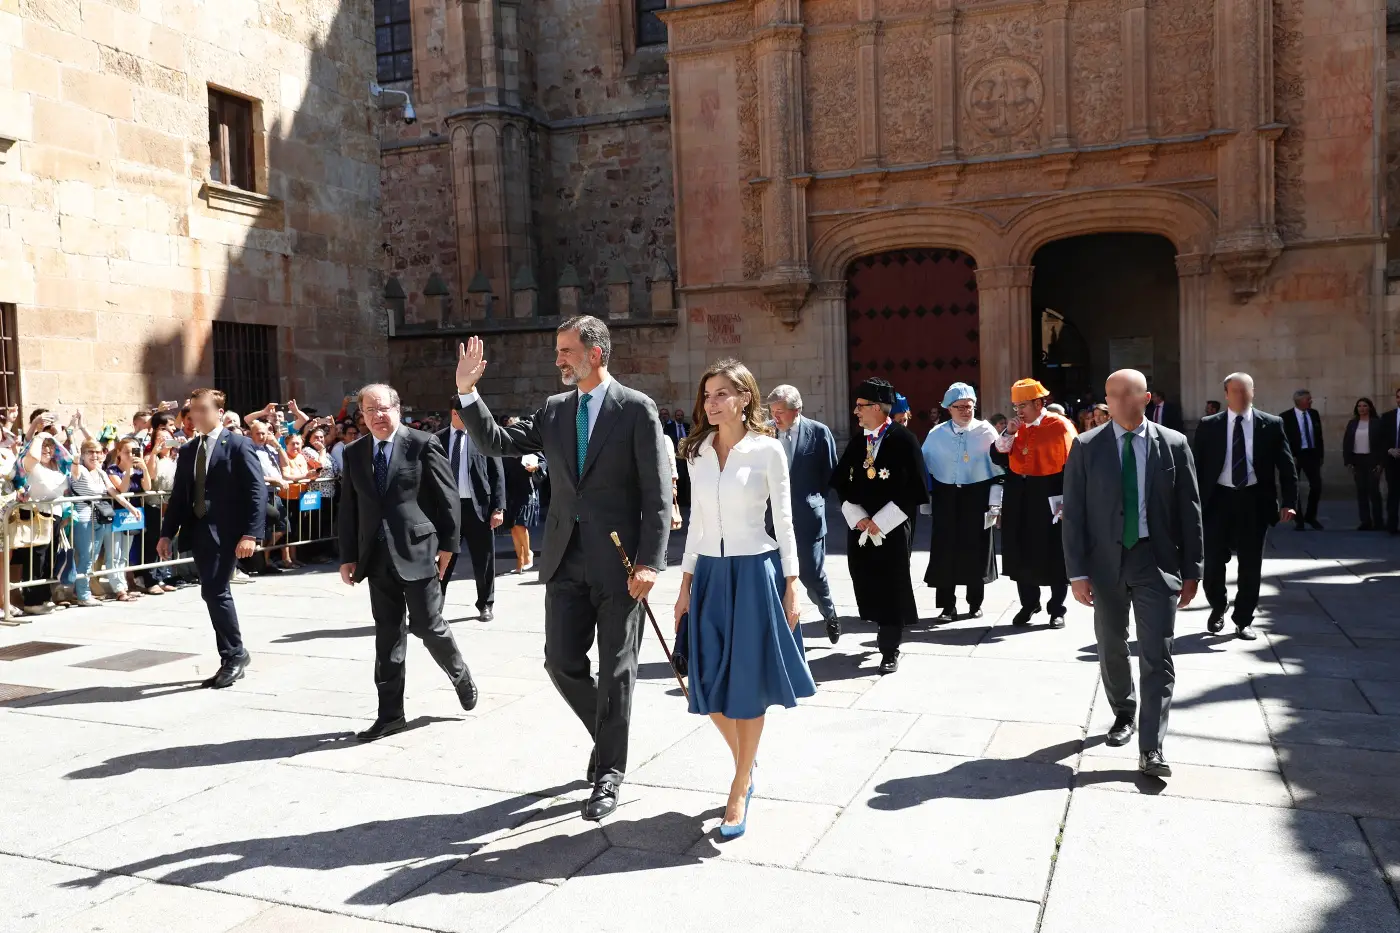 Queen Letizia joined King Felipe to launch University course on her birthday eve